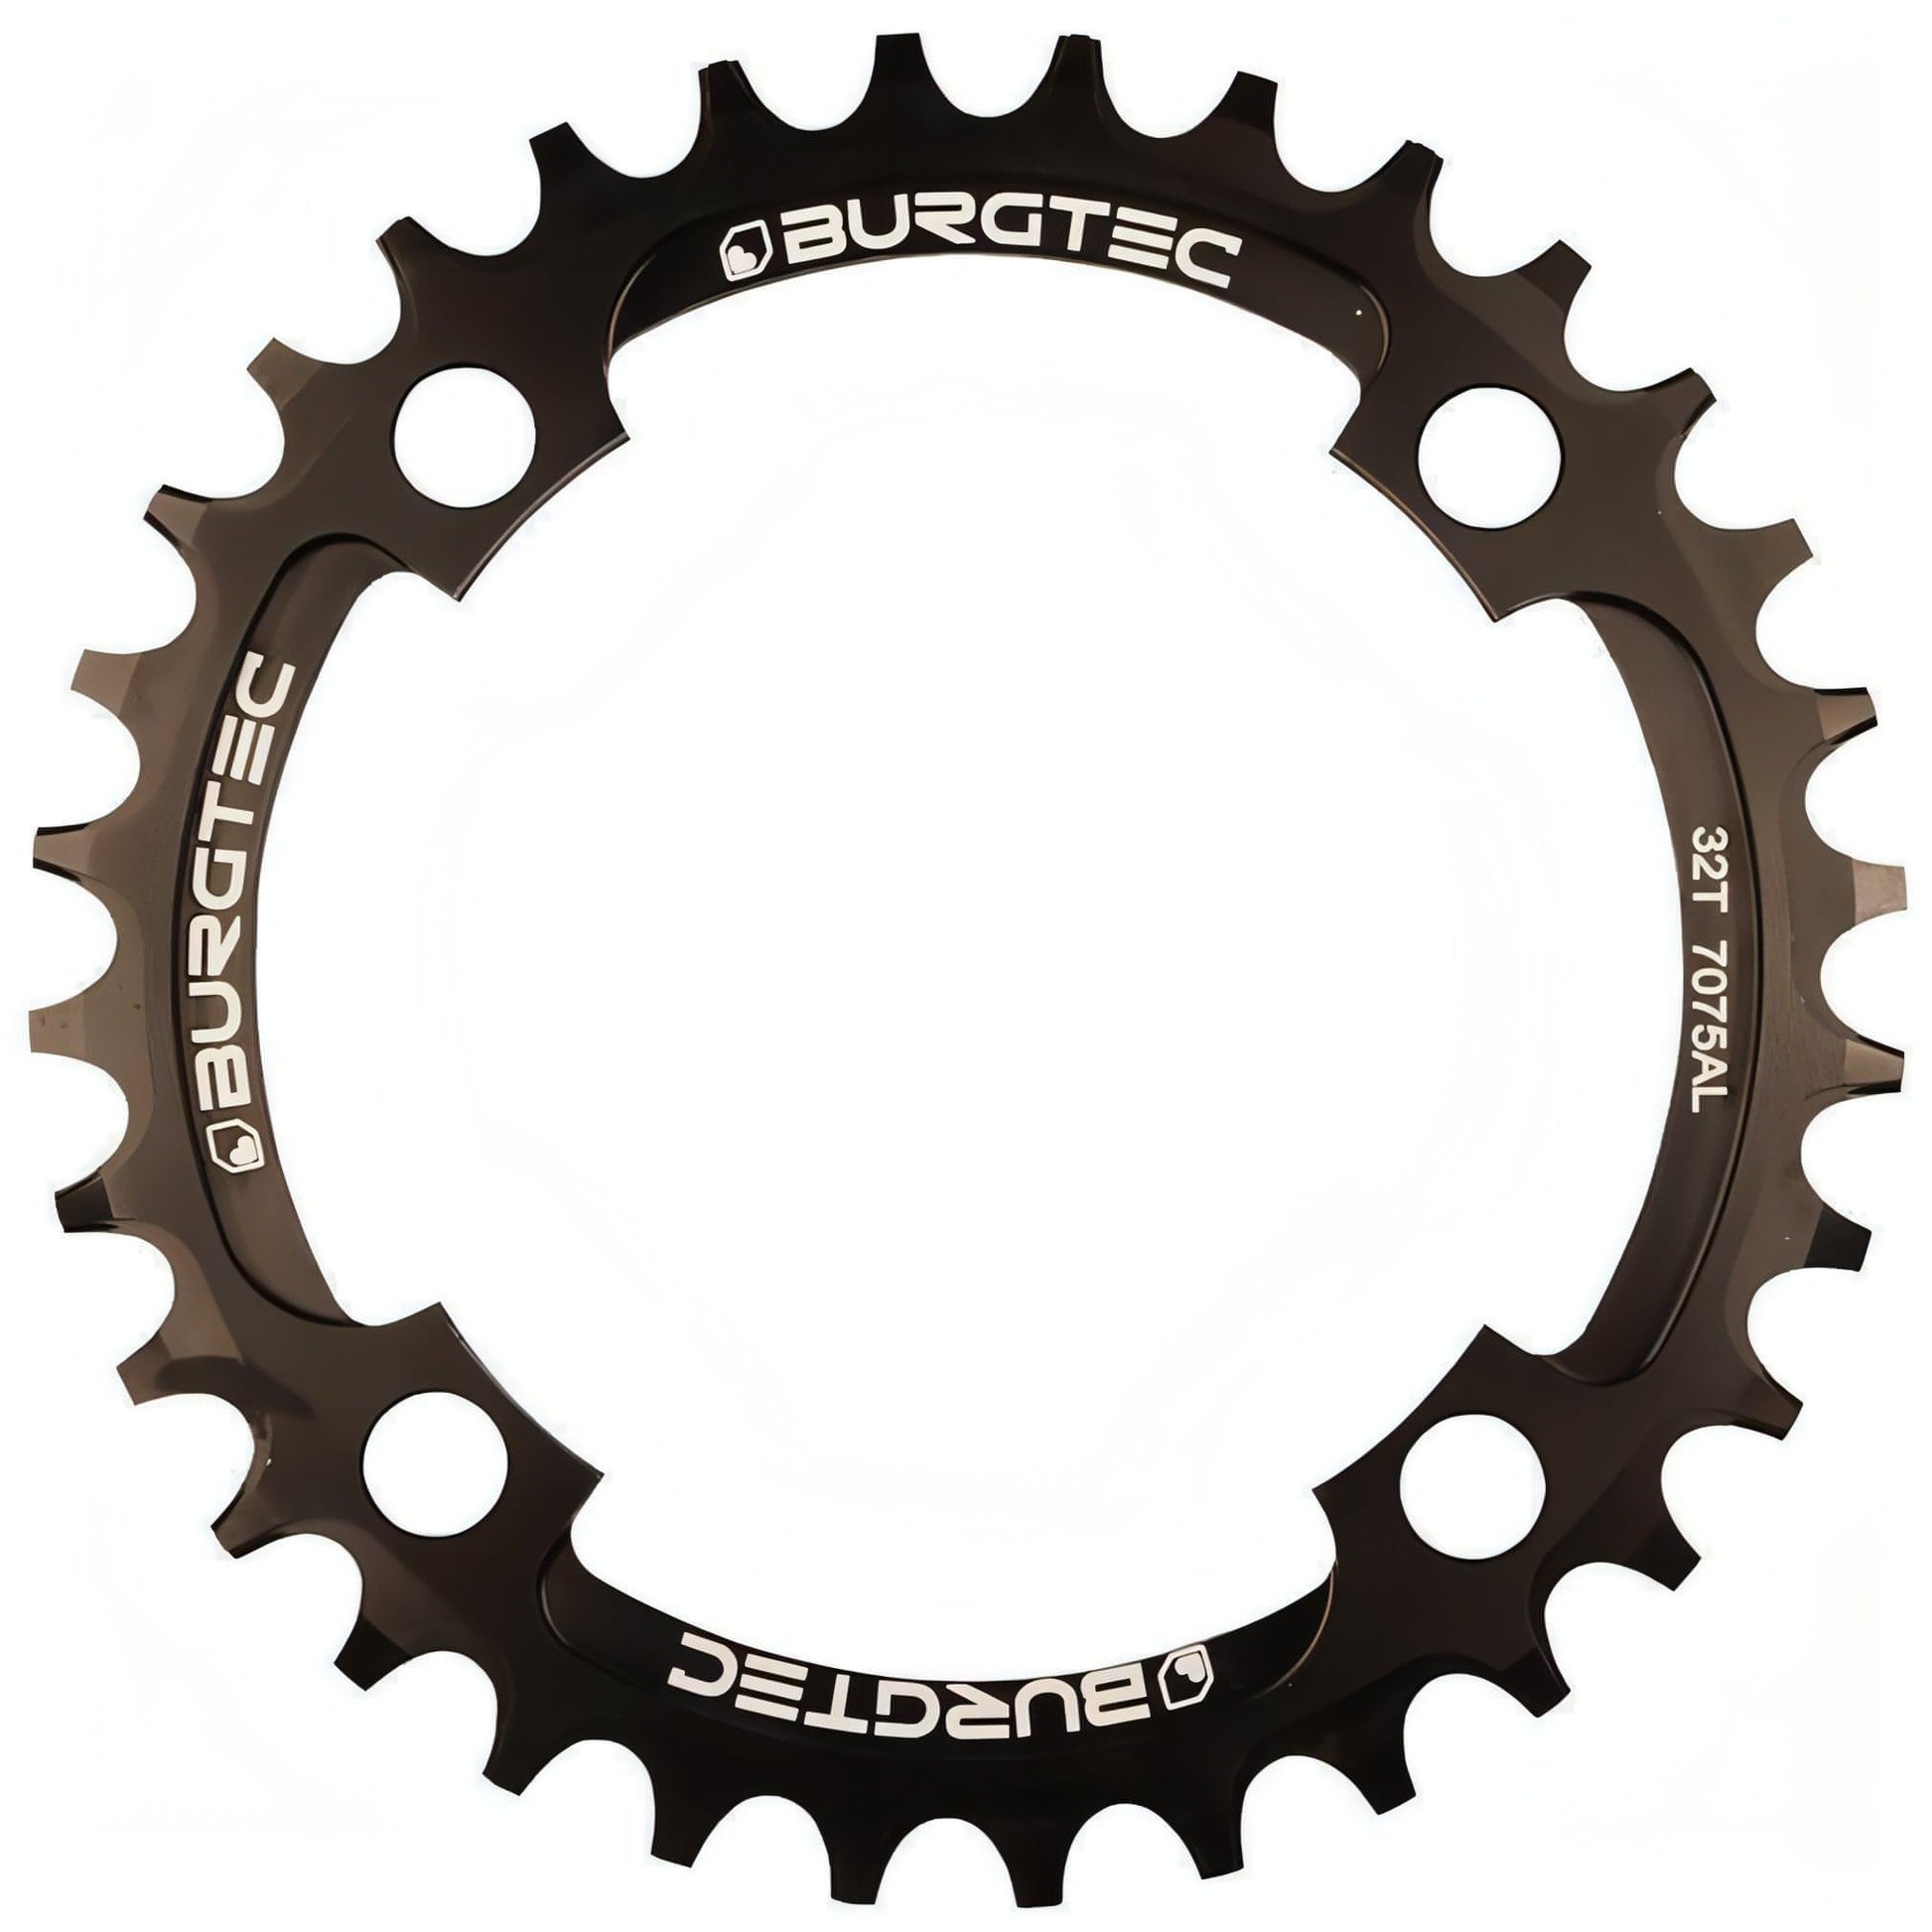 Burgtec 104 BCD Thick Thin Chainring - Black 713830992260 - Start Fitness